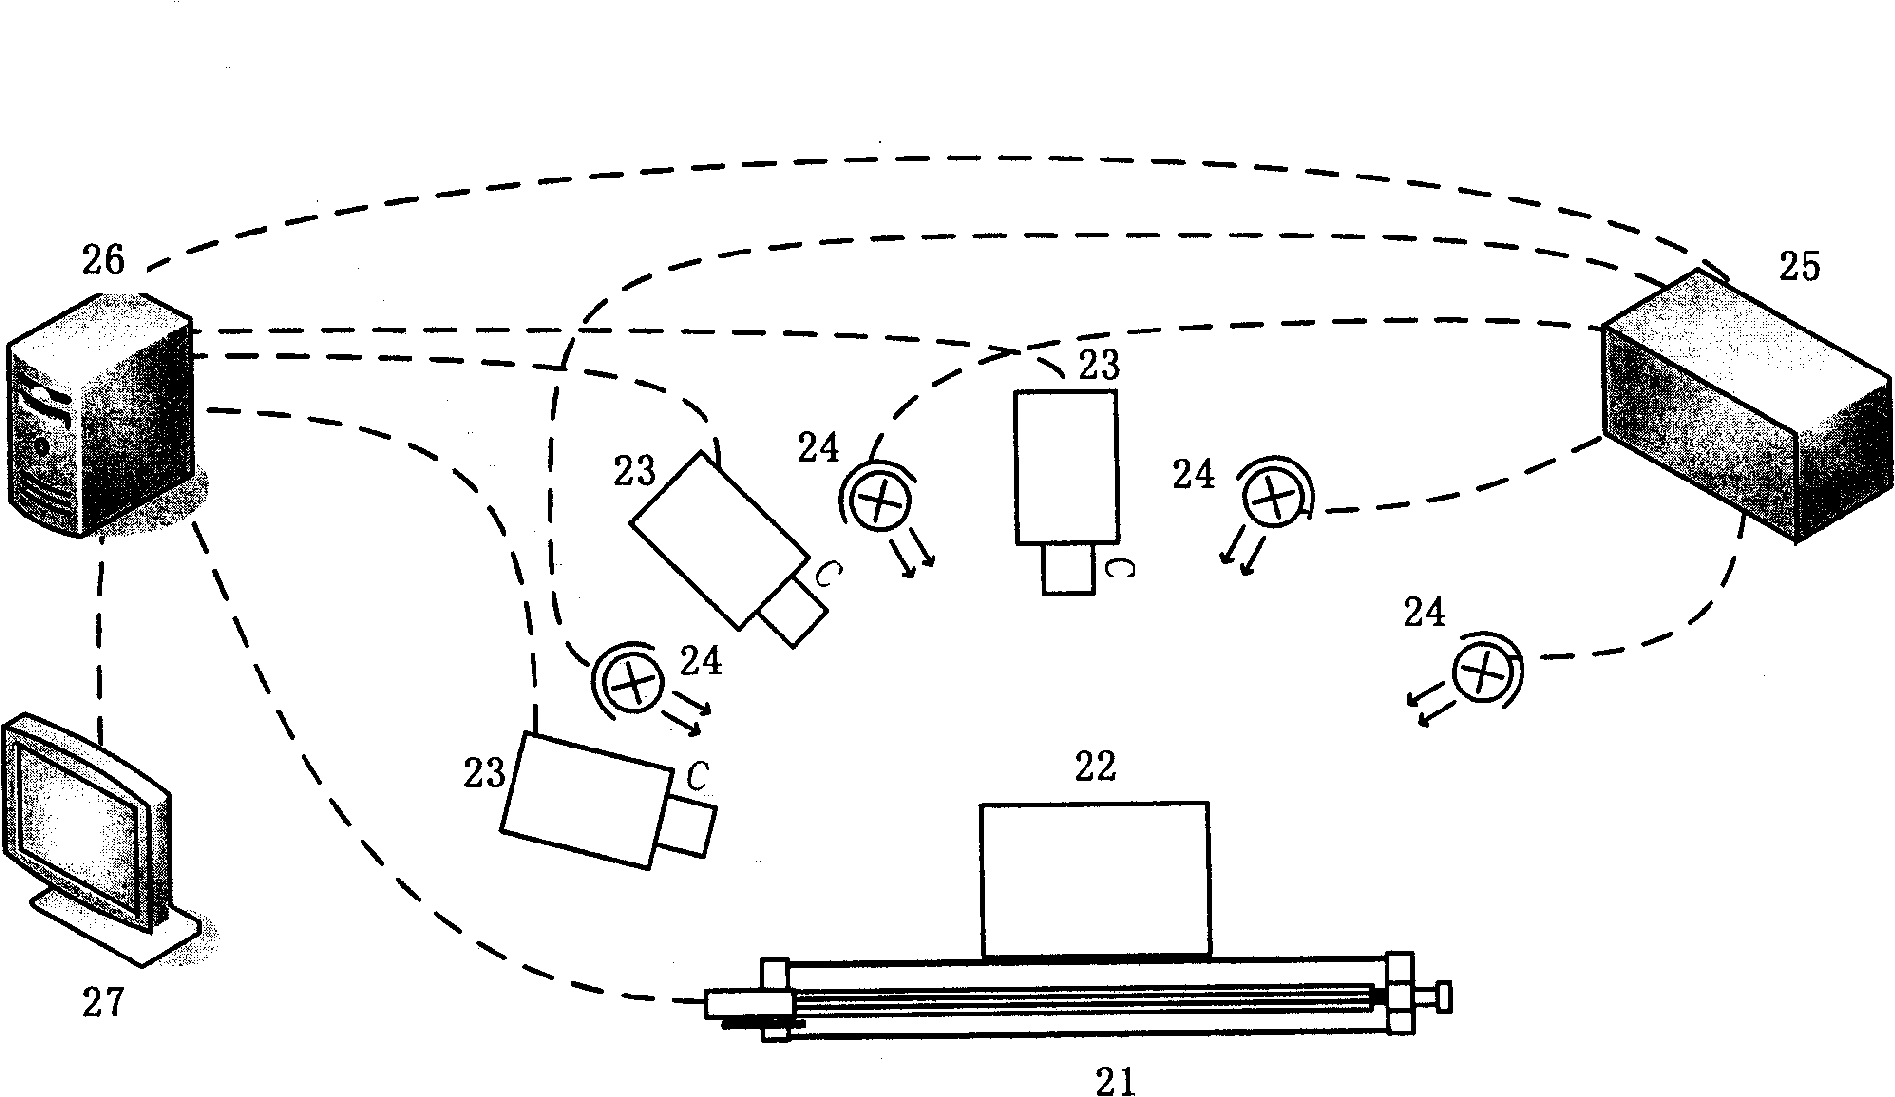 Automatic image data collecting system